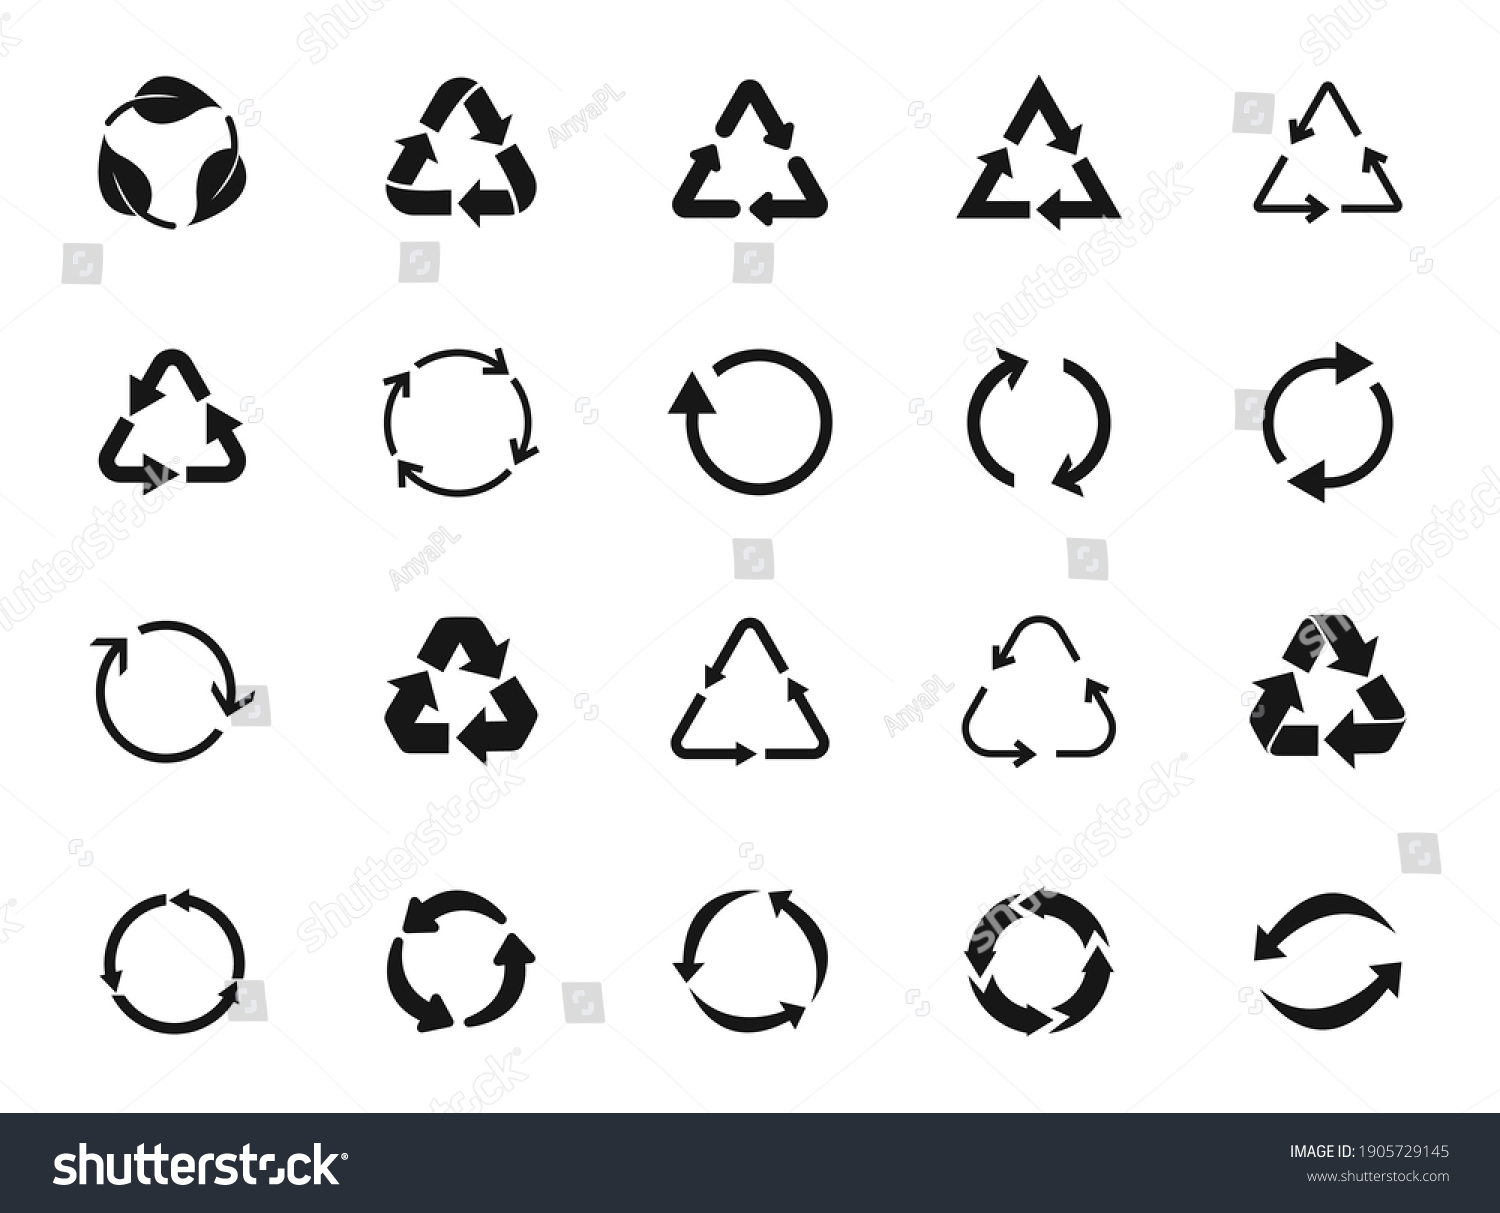 Set of recycle icon symbol vector. Recycling and rotation arrow icon pack. Ecology, cleanliness and recycling symbol. Black arrows recycle, means using recycled resources, recycling. Bio recycling. #1905729145